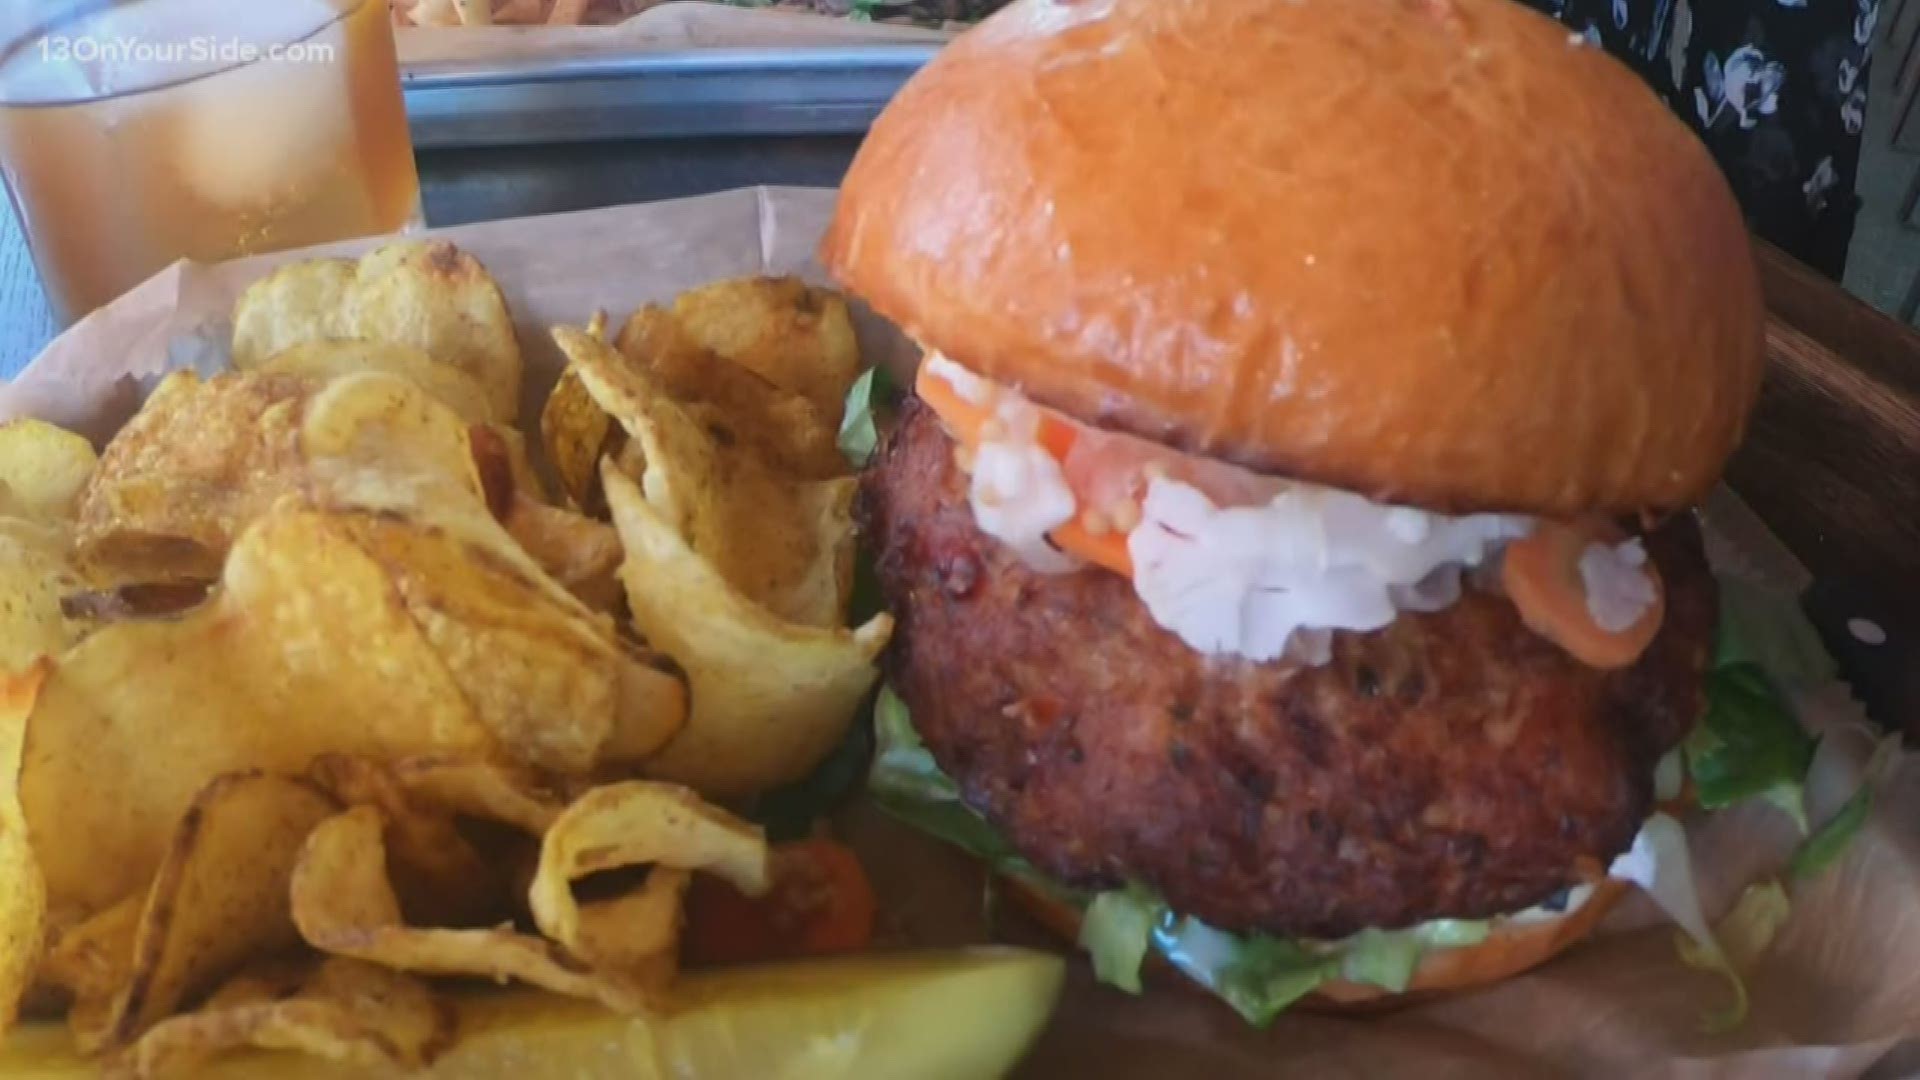 In honor of Restaurant Week GR kicking off this week, 13 ON YOUR SIDE's James Starks (sans Dave Kaechele) headed to a place that's participating: Jolly Pumpkin. They've got pies that are sure to impress anyone and burgers that look out of this world.